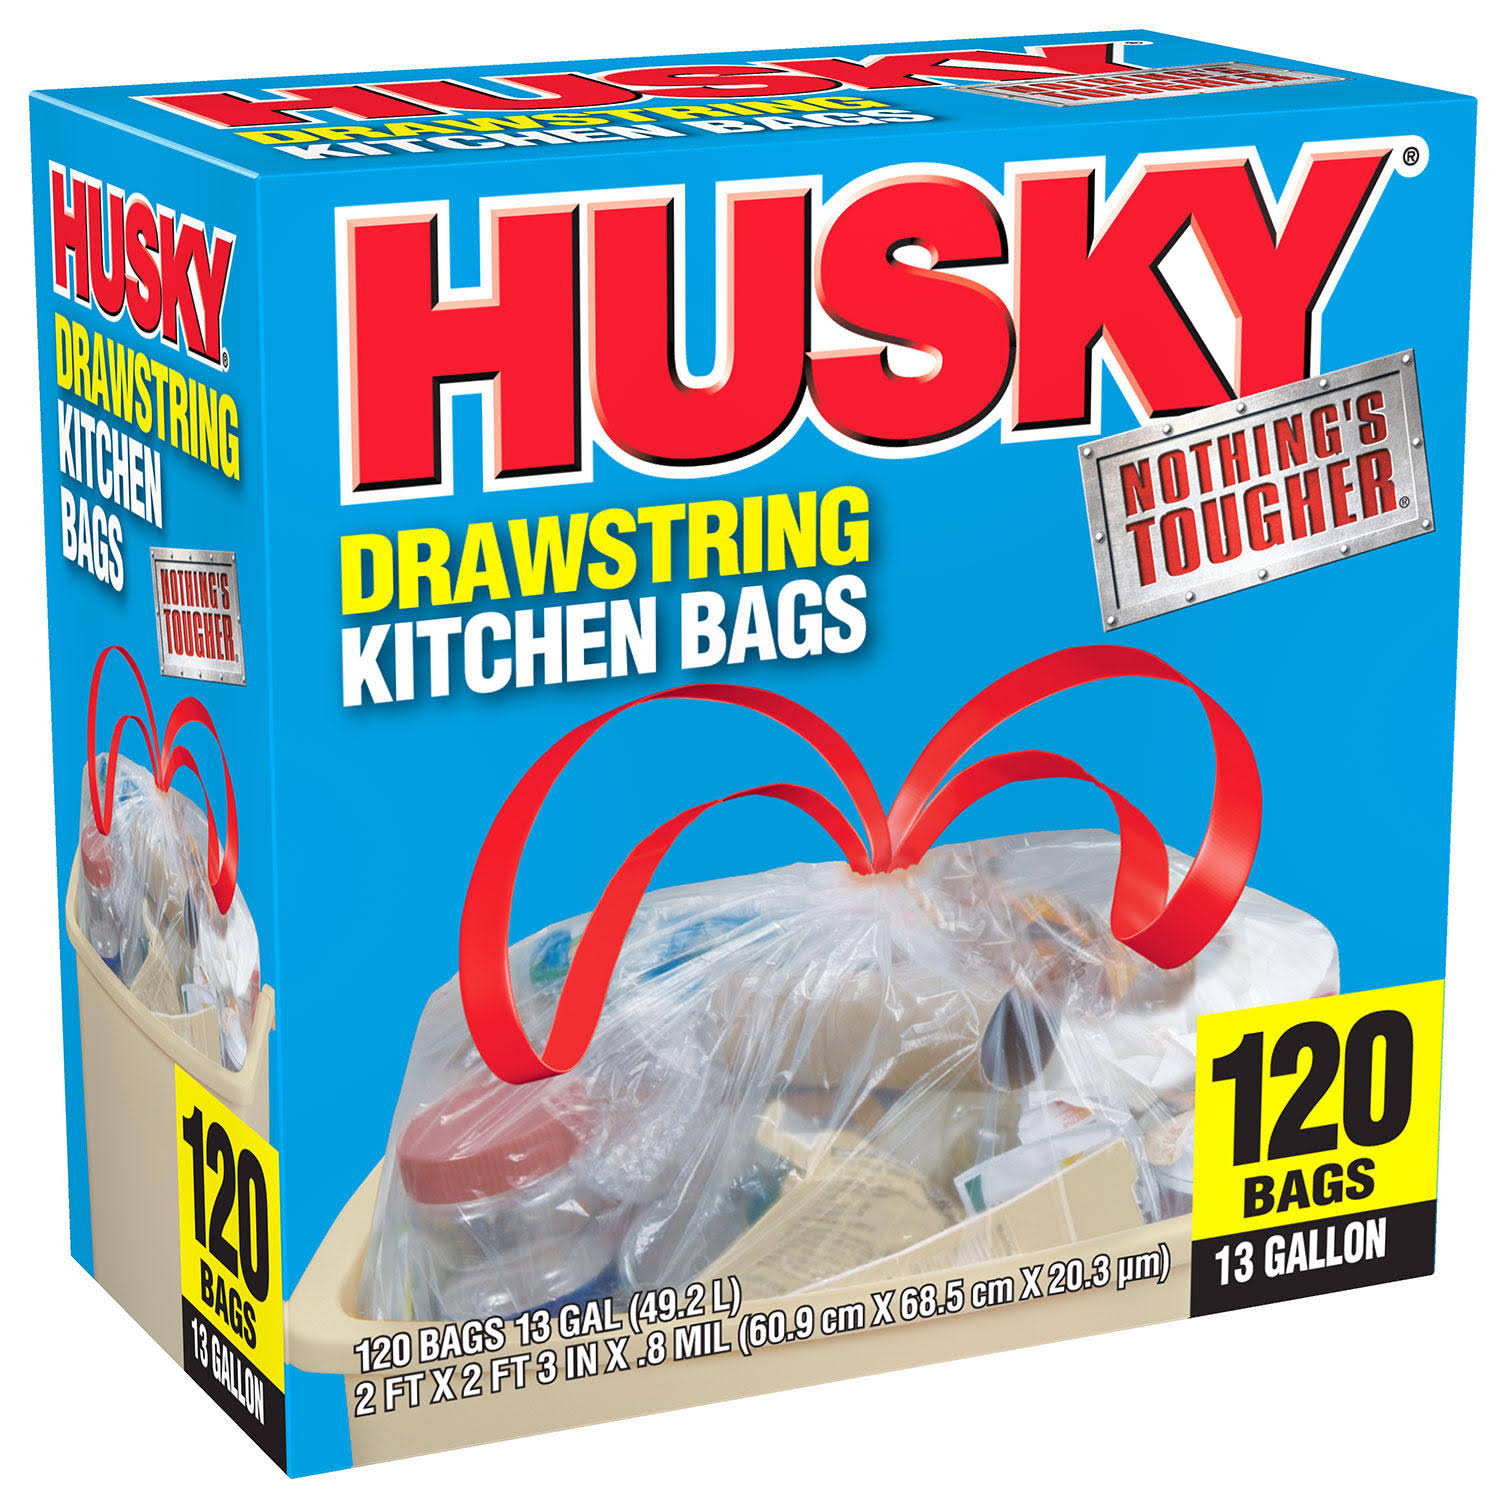 Poly America Husky Draw String Kitchen Bags - 120ct, 13gal